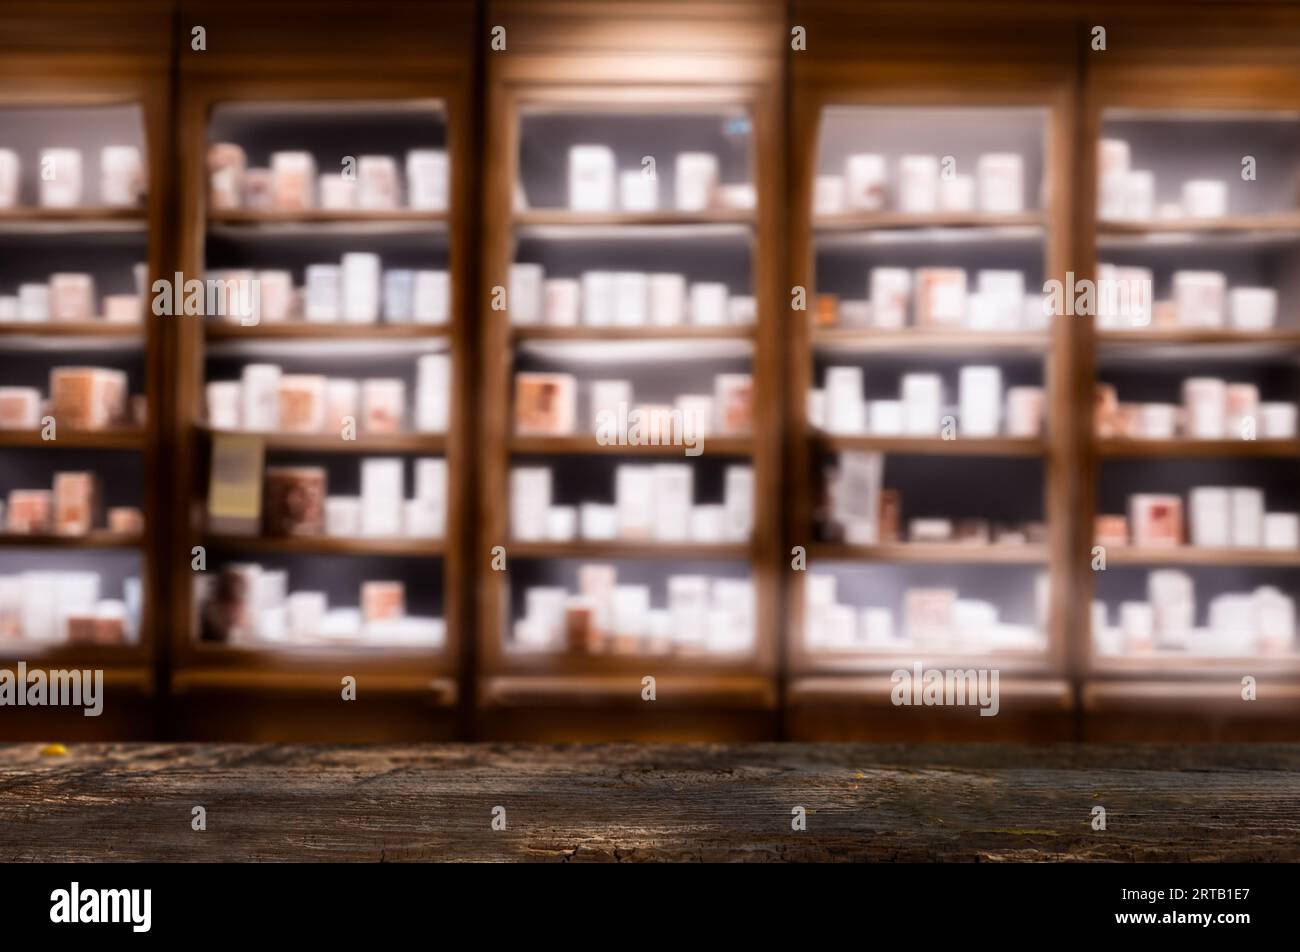 Dark Wooden Counter with Blurred Pharmacy Shelves ideal for product presentations or mockups. Stock Photo